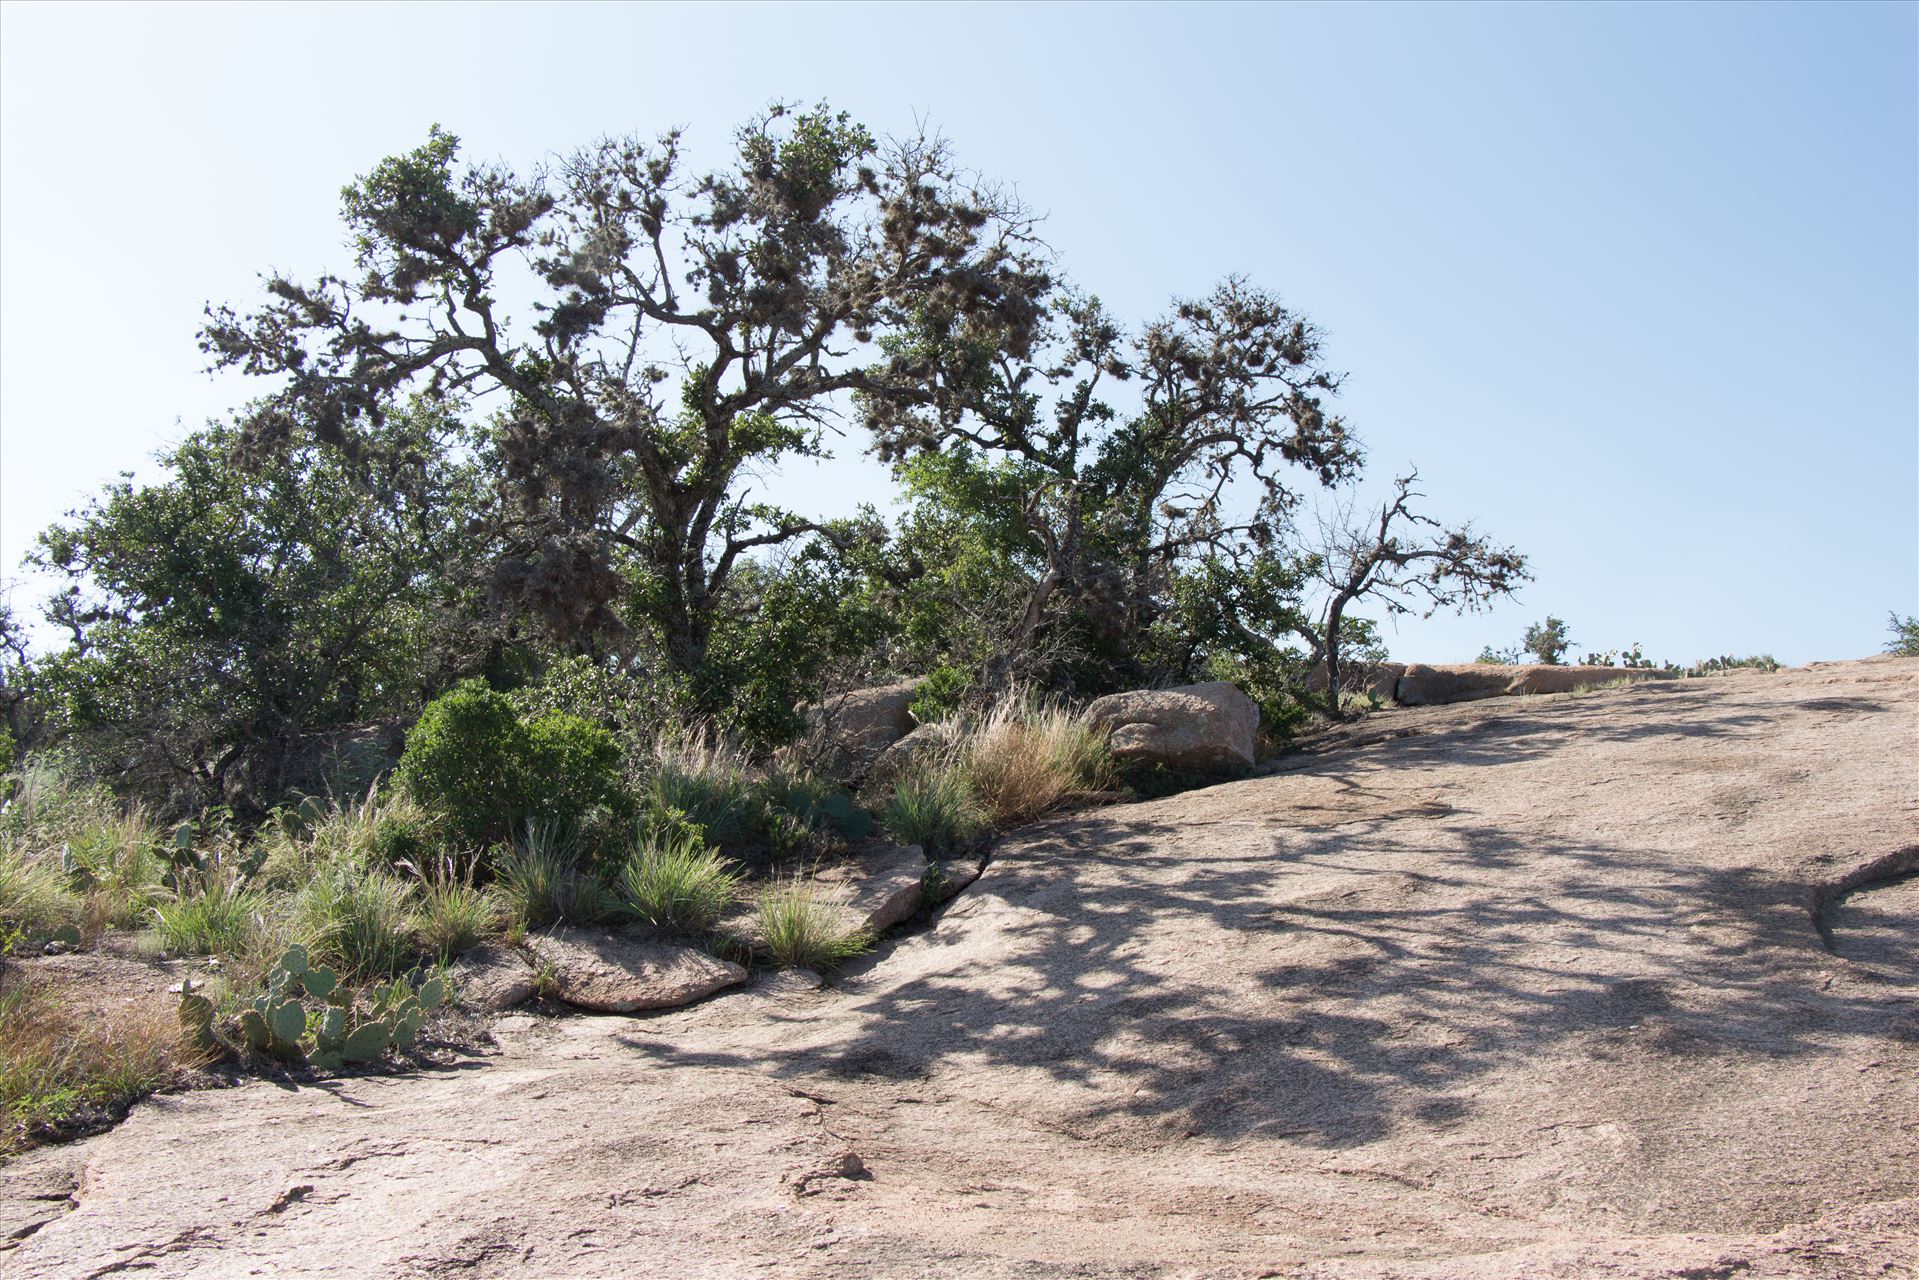 20130723-Enchanted Rock-DSLR-053.jpg  by Charles Smith Photography